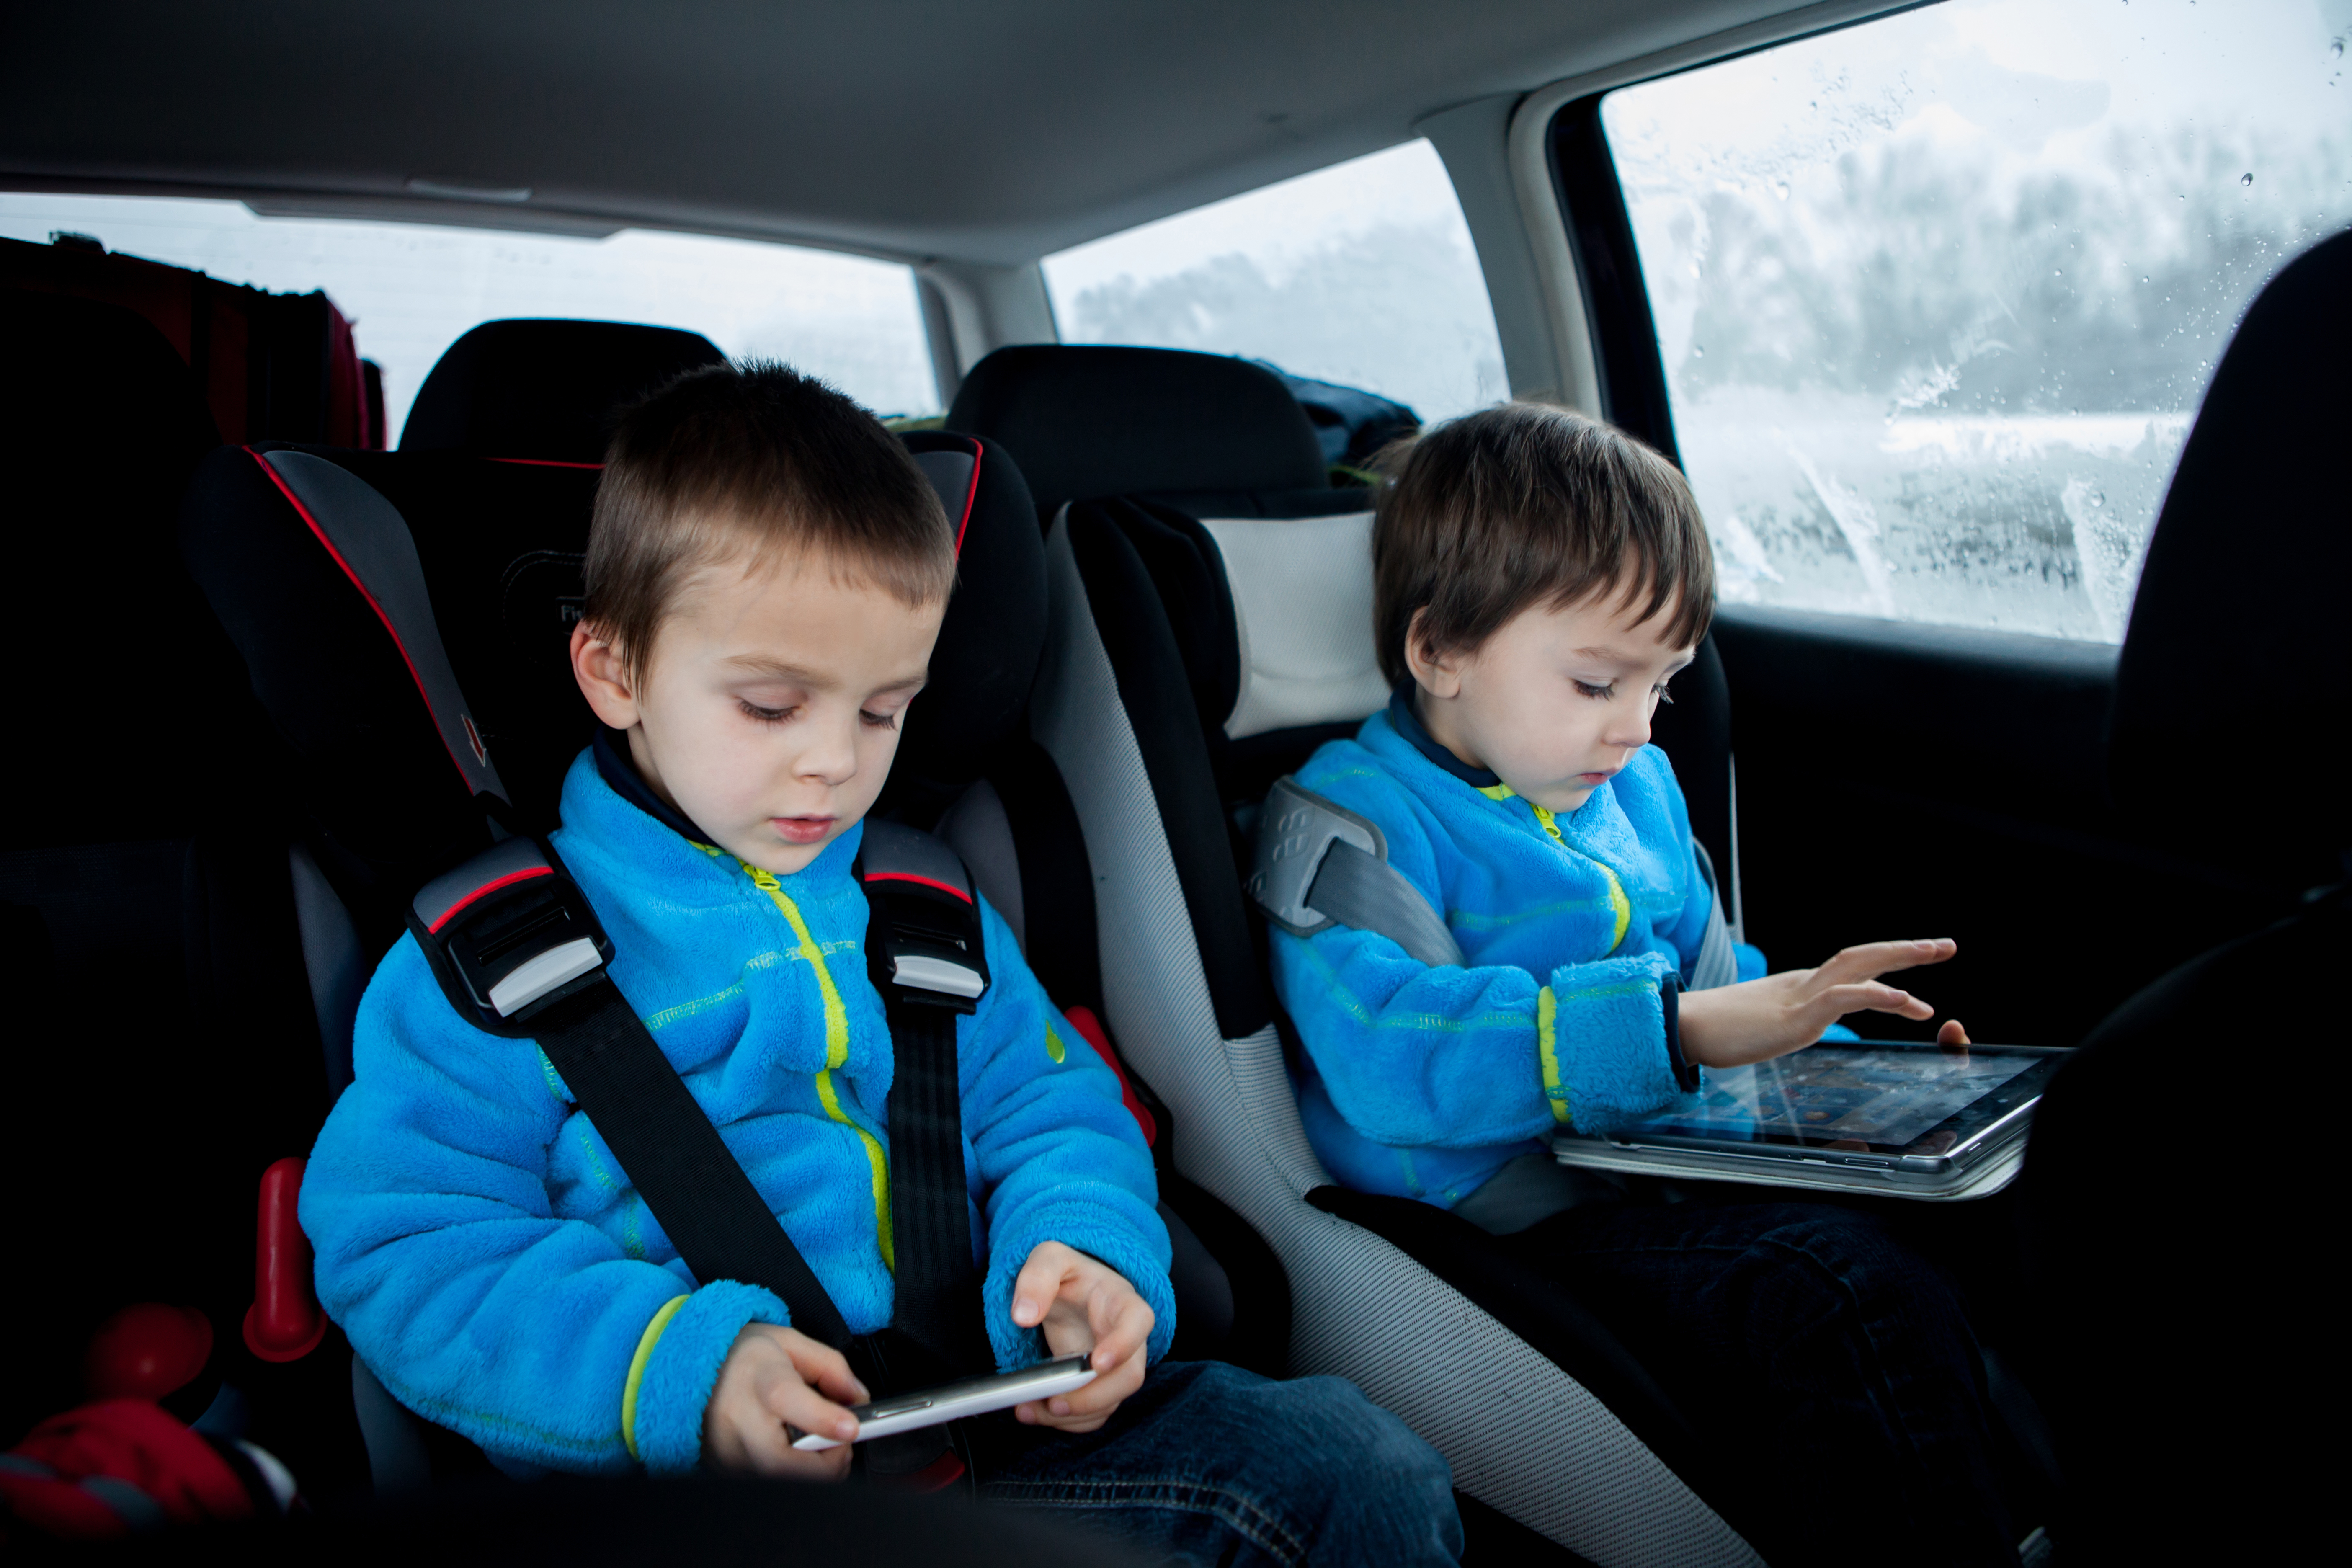 Two kids in car seats, traveling in car, playing